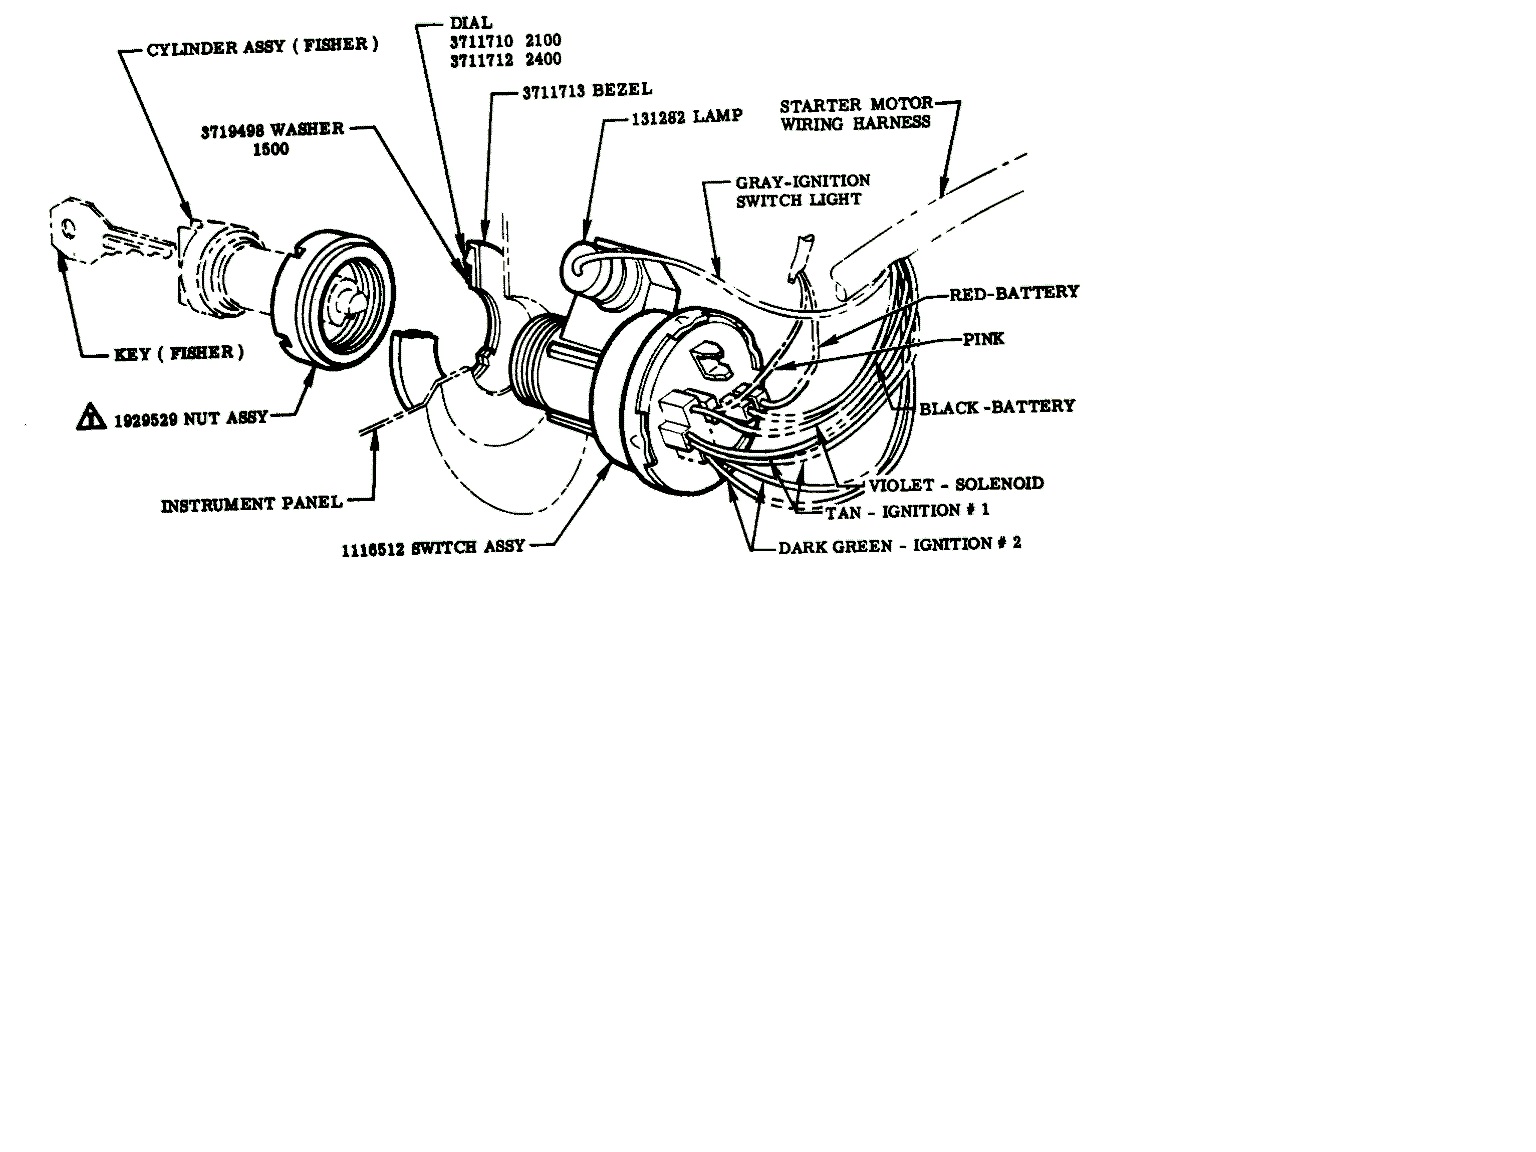 1972 Chevy C10 Light Wiring Diagram - Wiring Diagram and Schematic